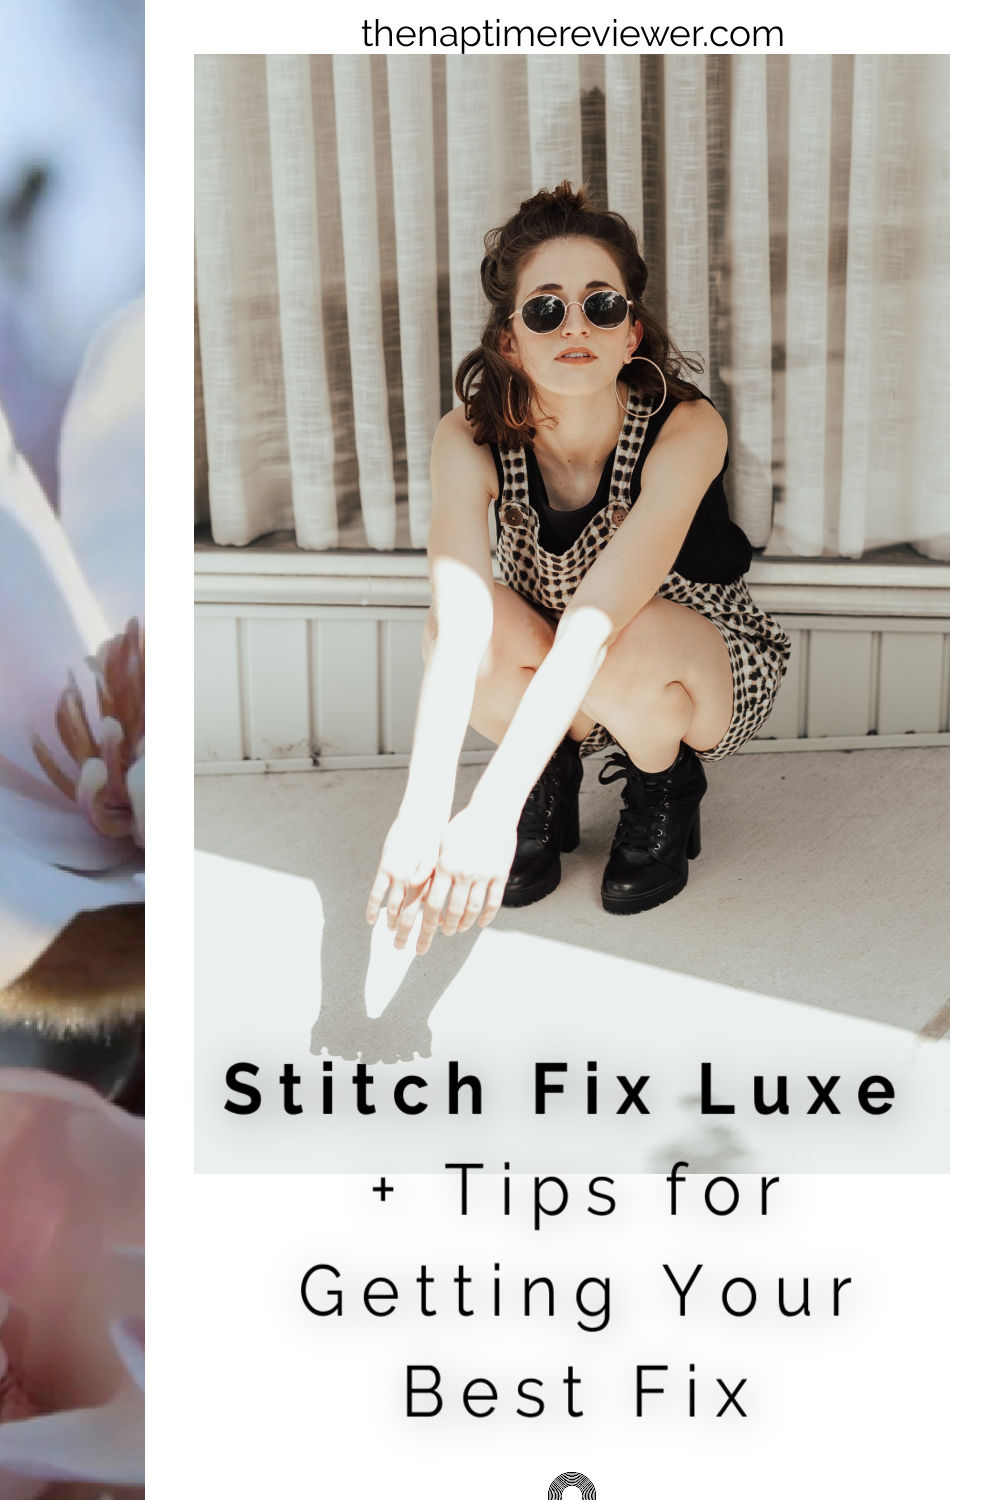 Stitch Fix Luxe + Tips for Getting Your Best Fix